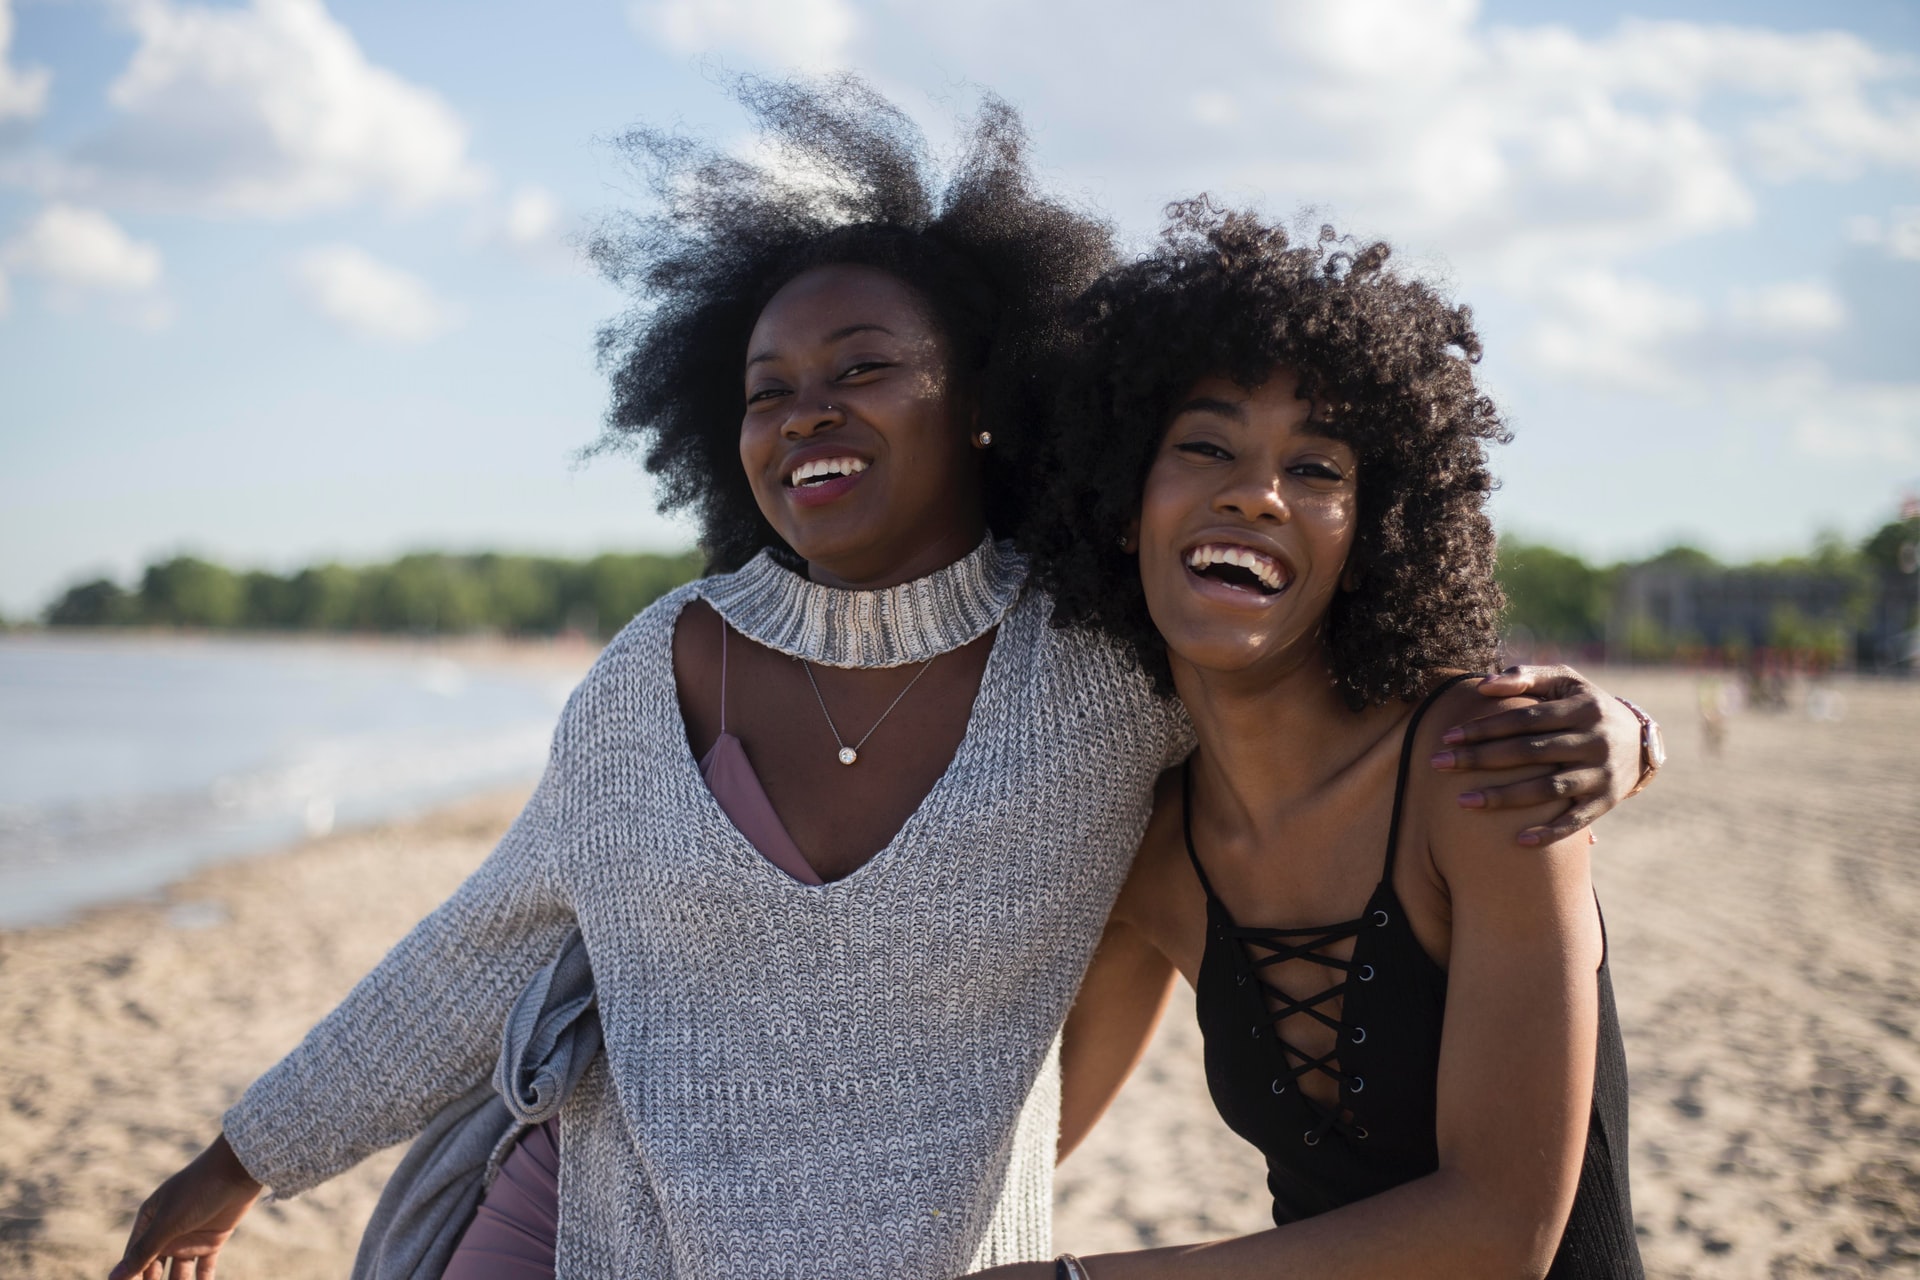 Two people with dark brown skin and dark, curly hair, smiling on a beach. Each person has their arm around the other.